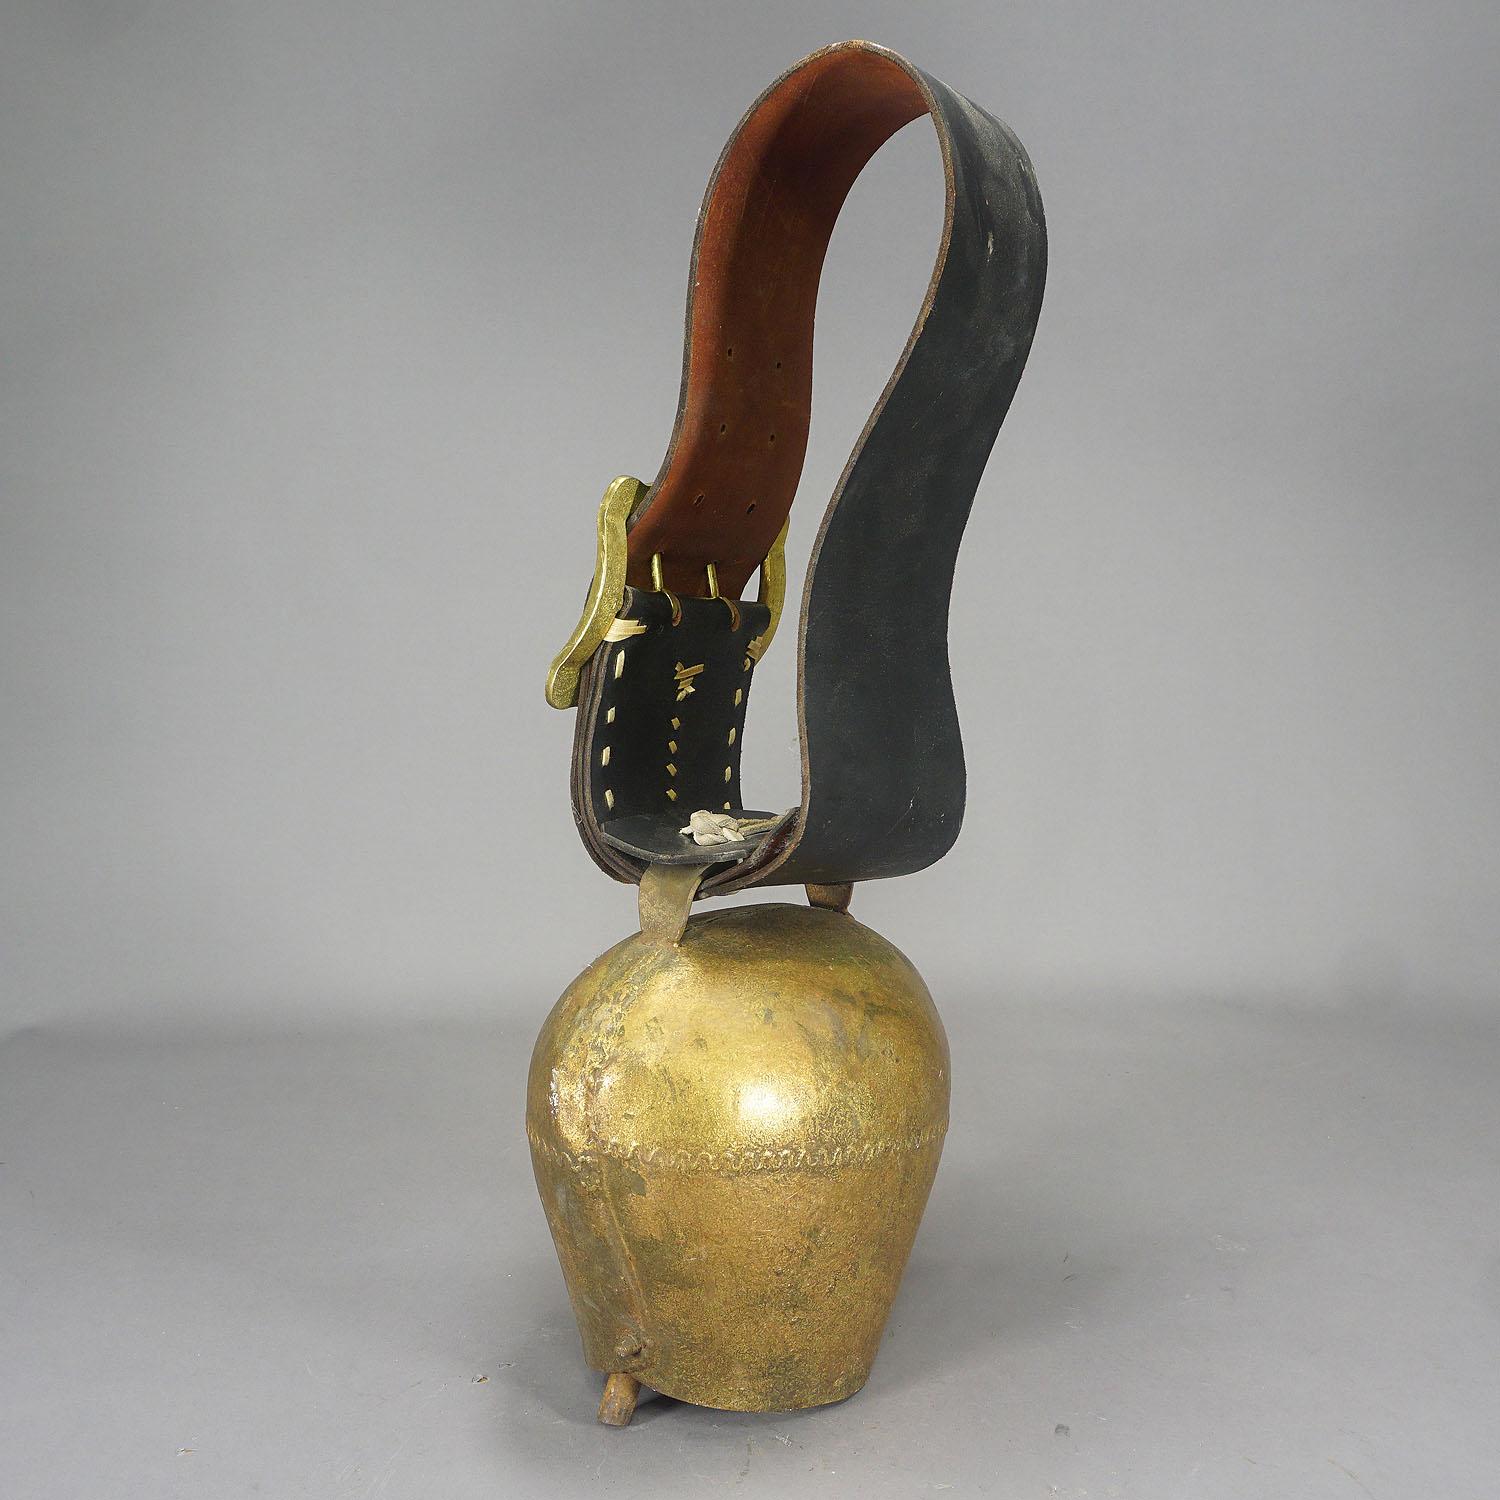 A large handforged and gilded iron cow bell from the Swiss alps manufactured around 1920. The bell comes with its black leather strap with buckle (most probably later replaced). These bells are used to locate cattles in the pasture. Cows wear them